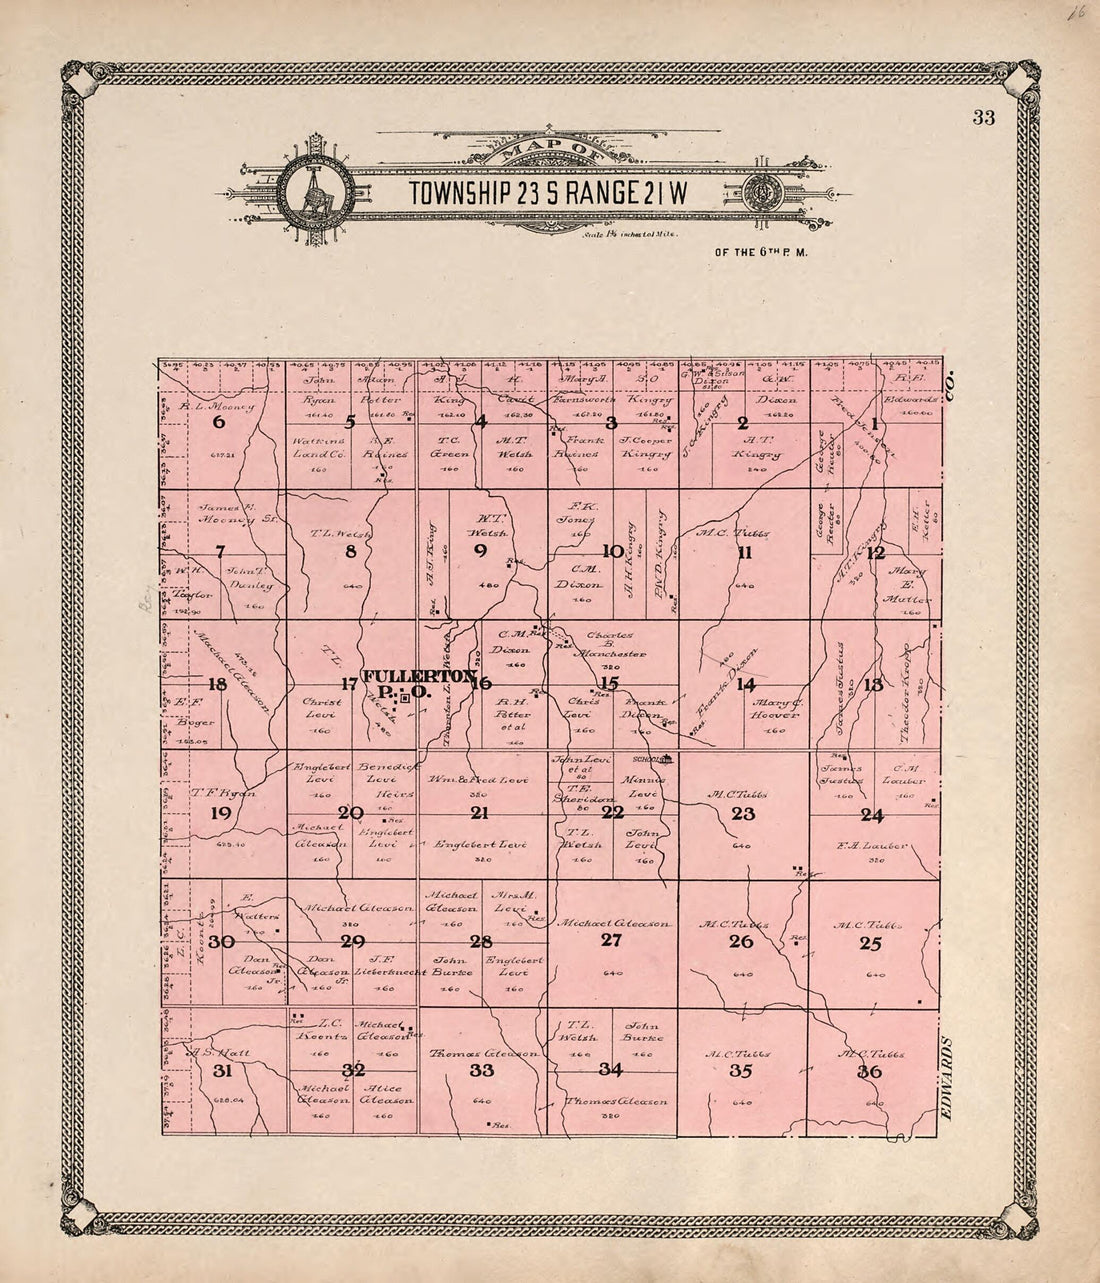 This old map of Map of Township 23 S Range 21 W from Standard Atlas of Hodgeman County, Kansas from 1907 was created by  Geo. A. Ogle &amp; Co in 1907